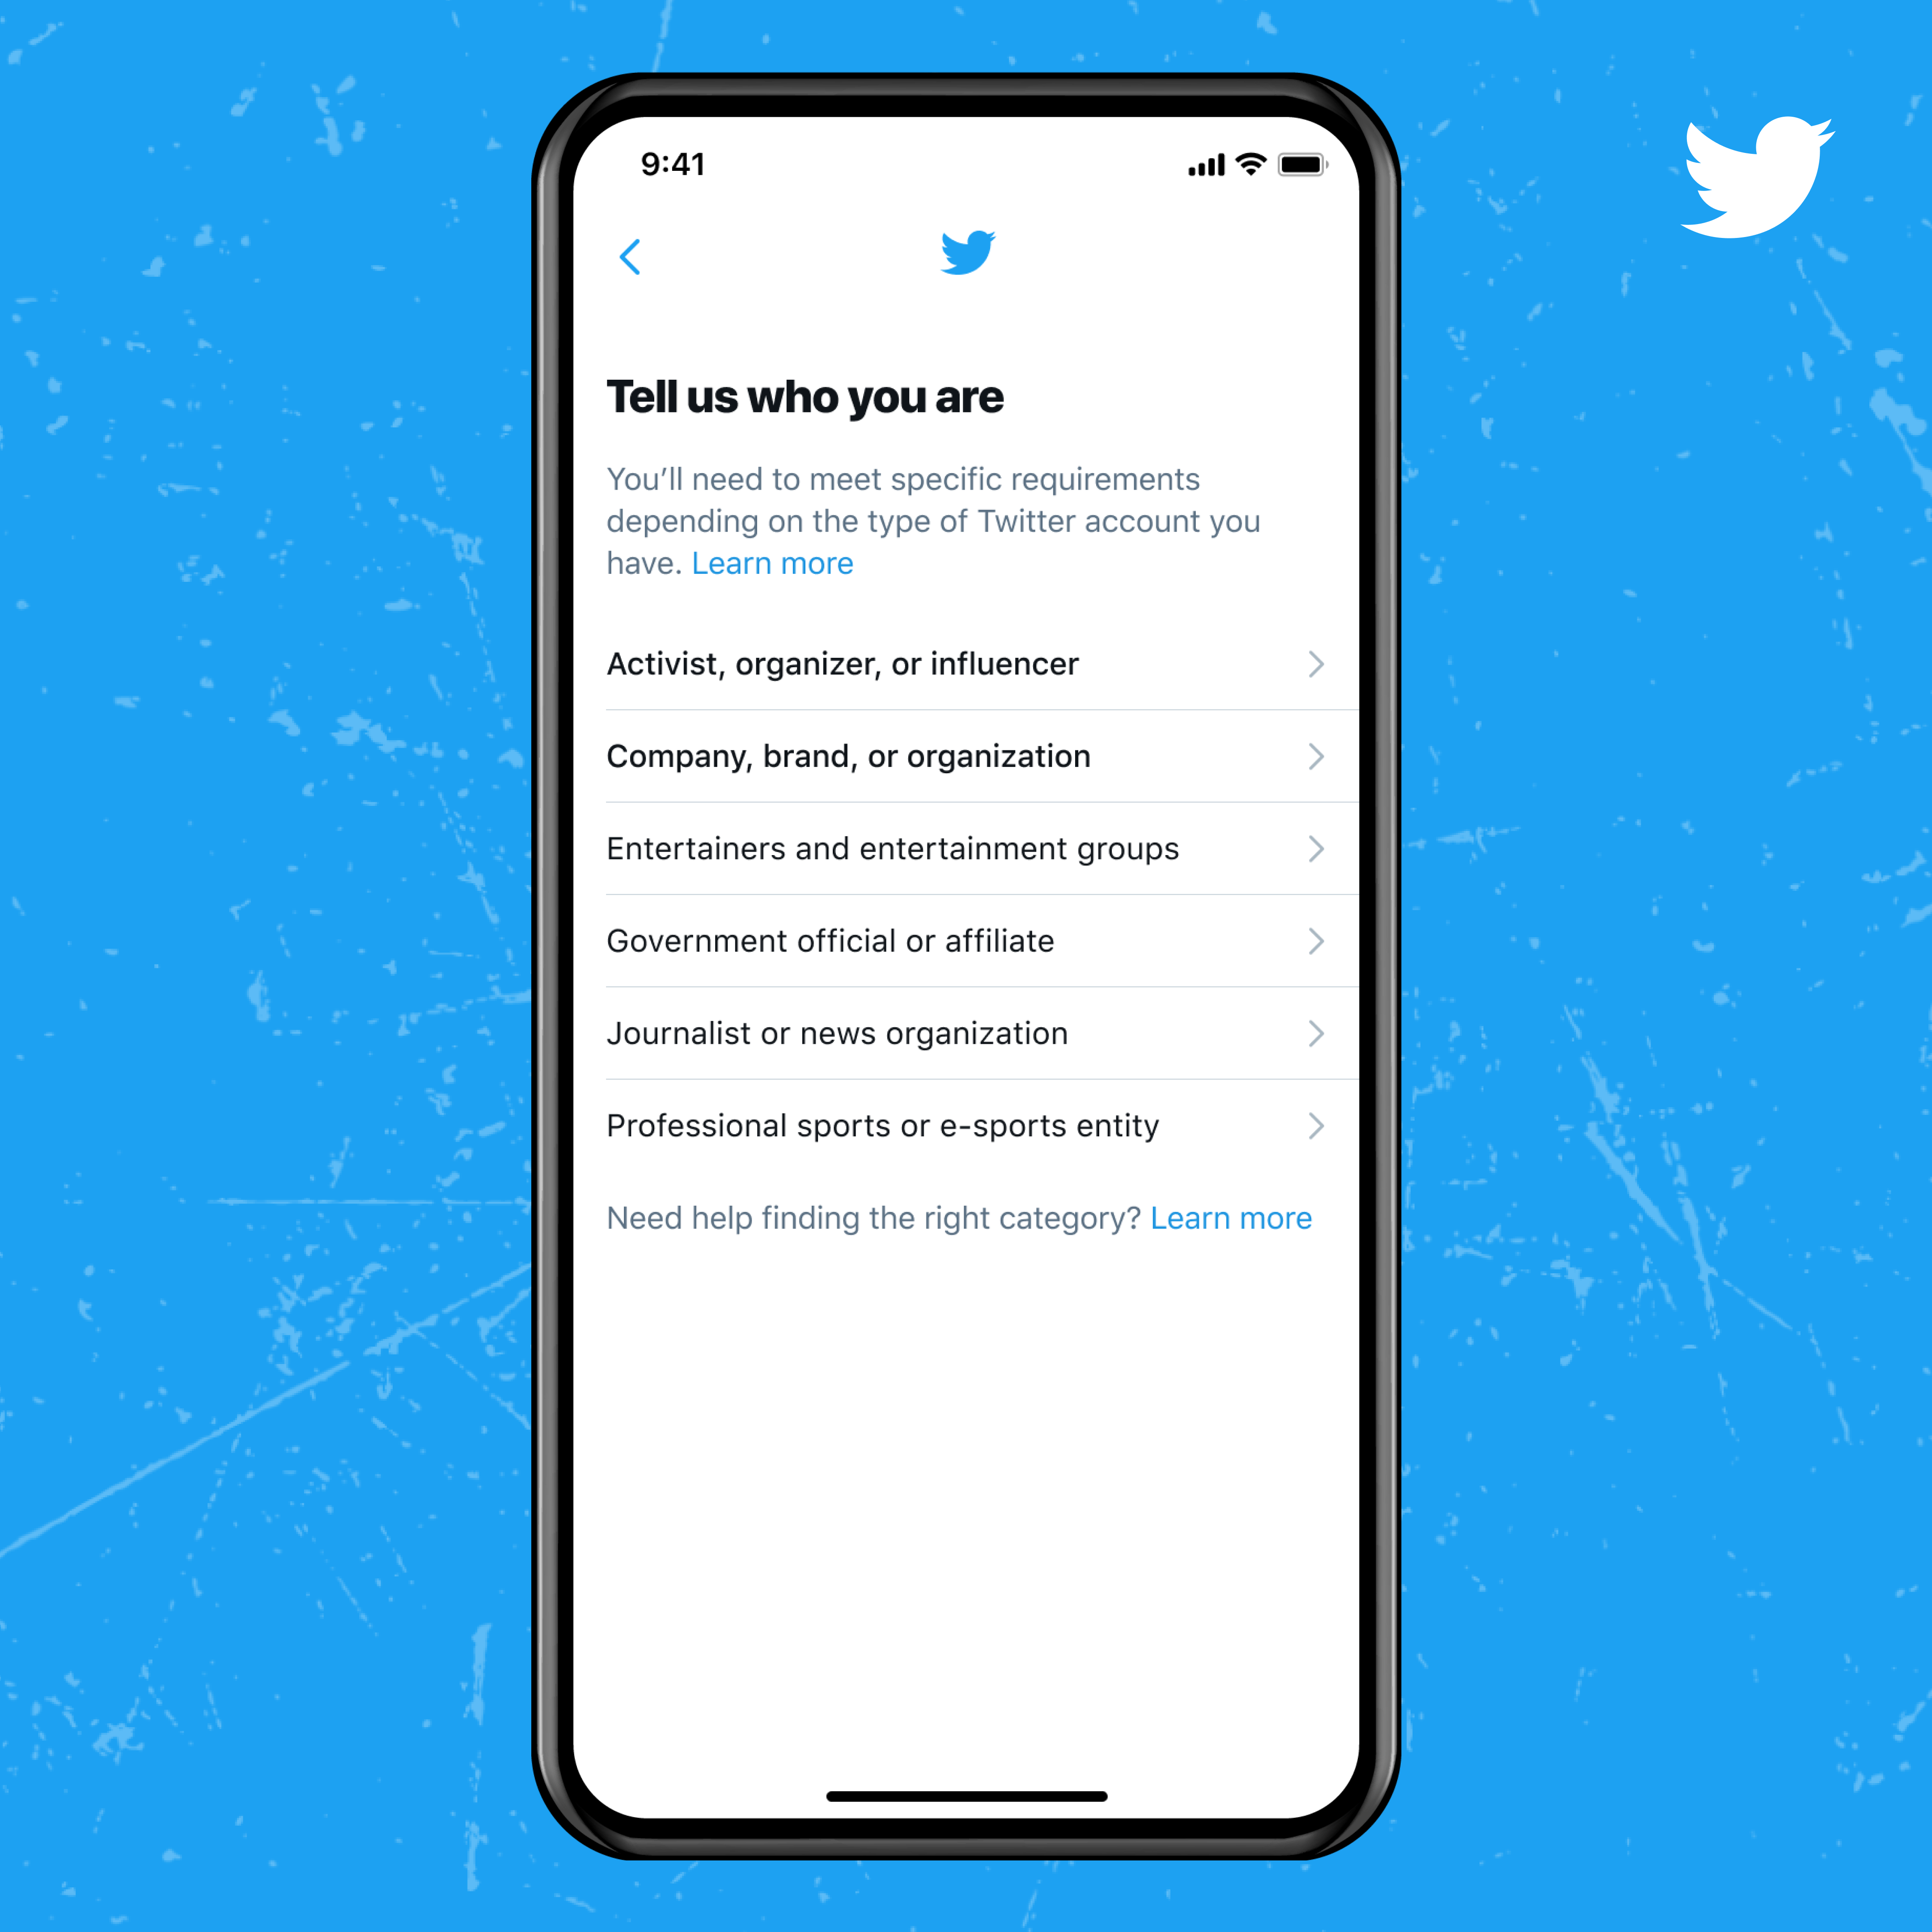 Twitter rolls out credible verification application process